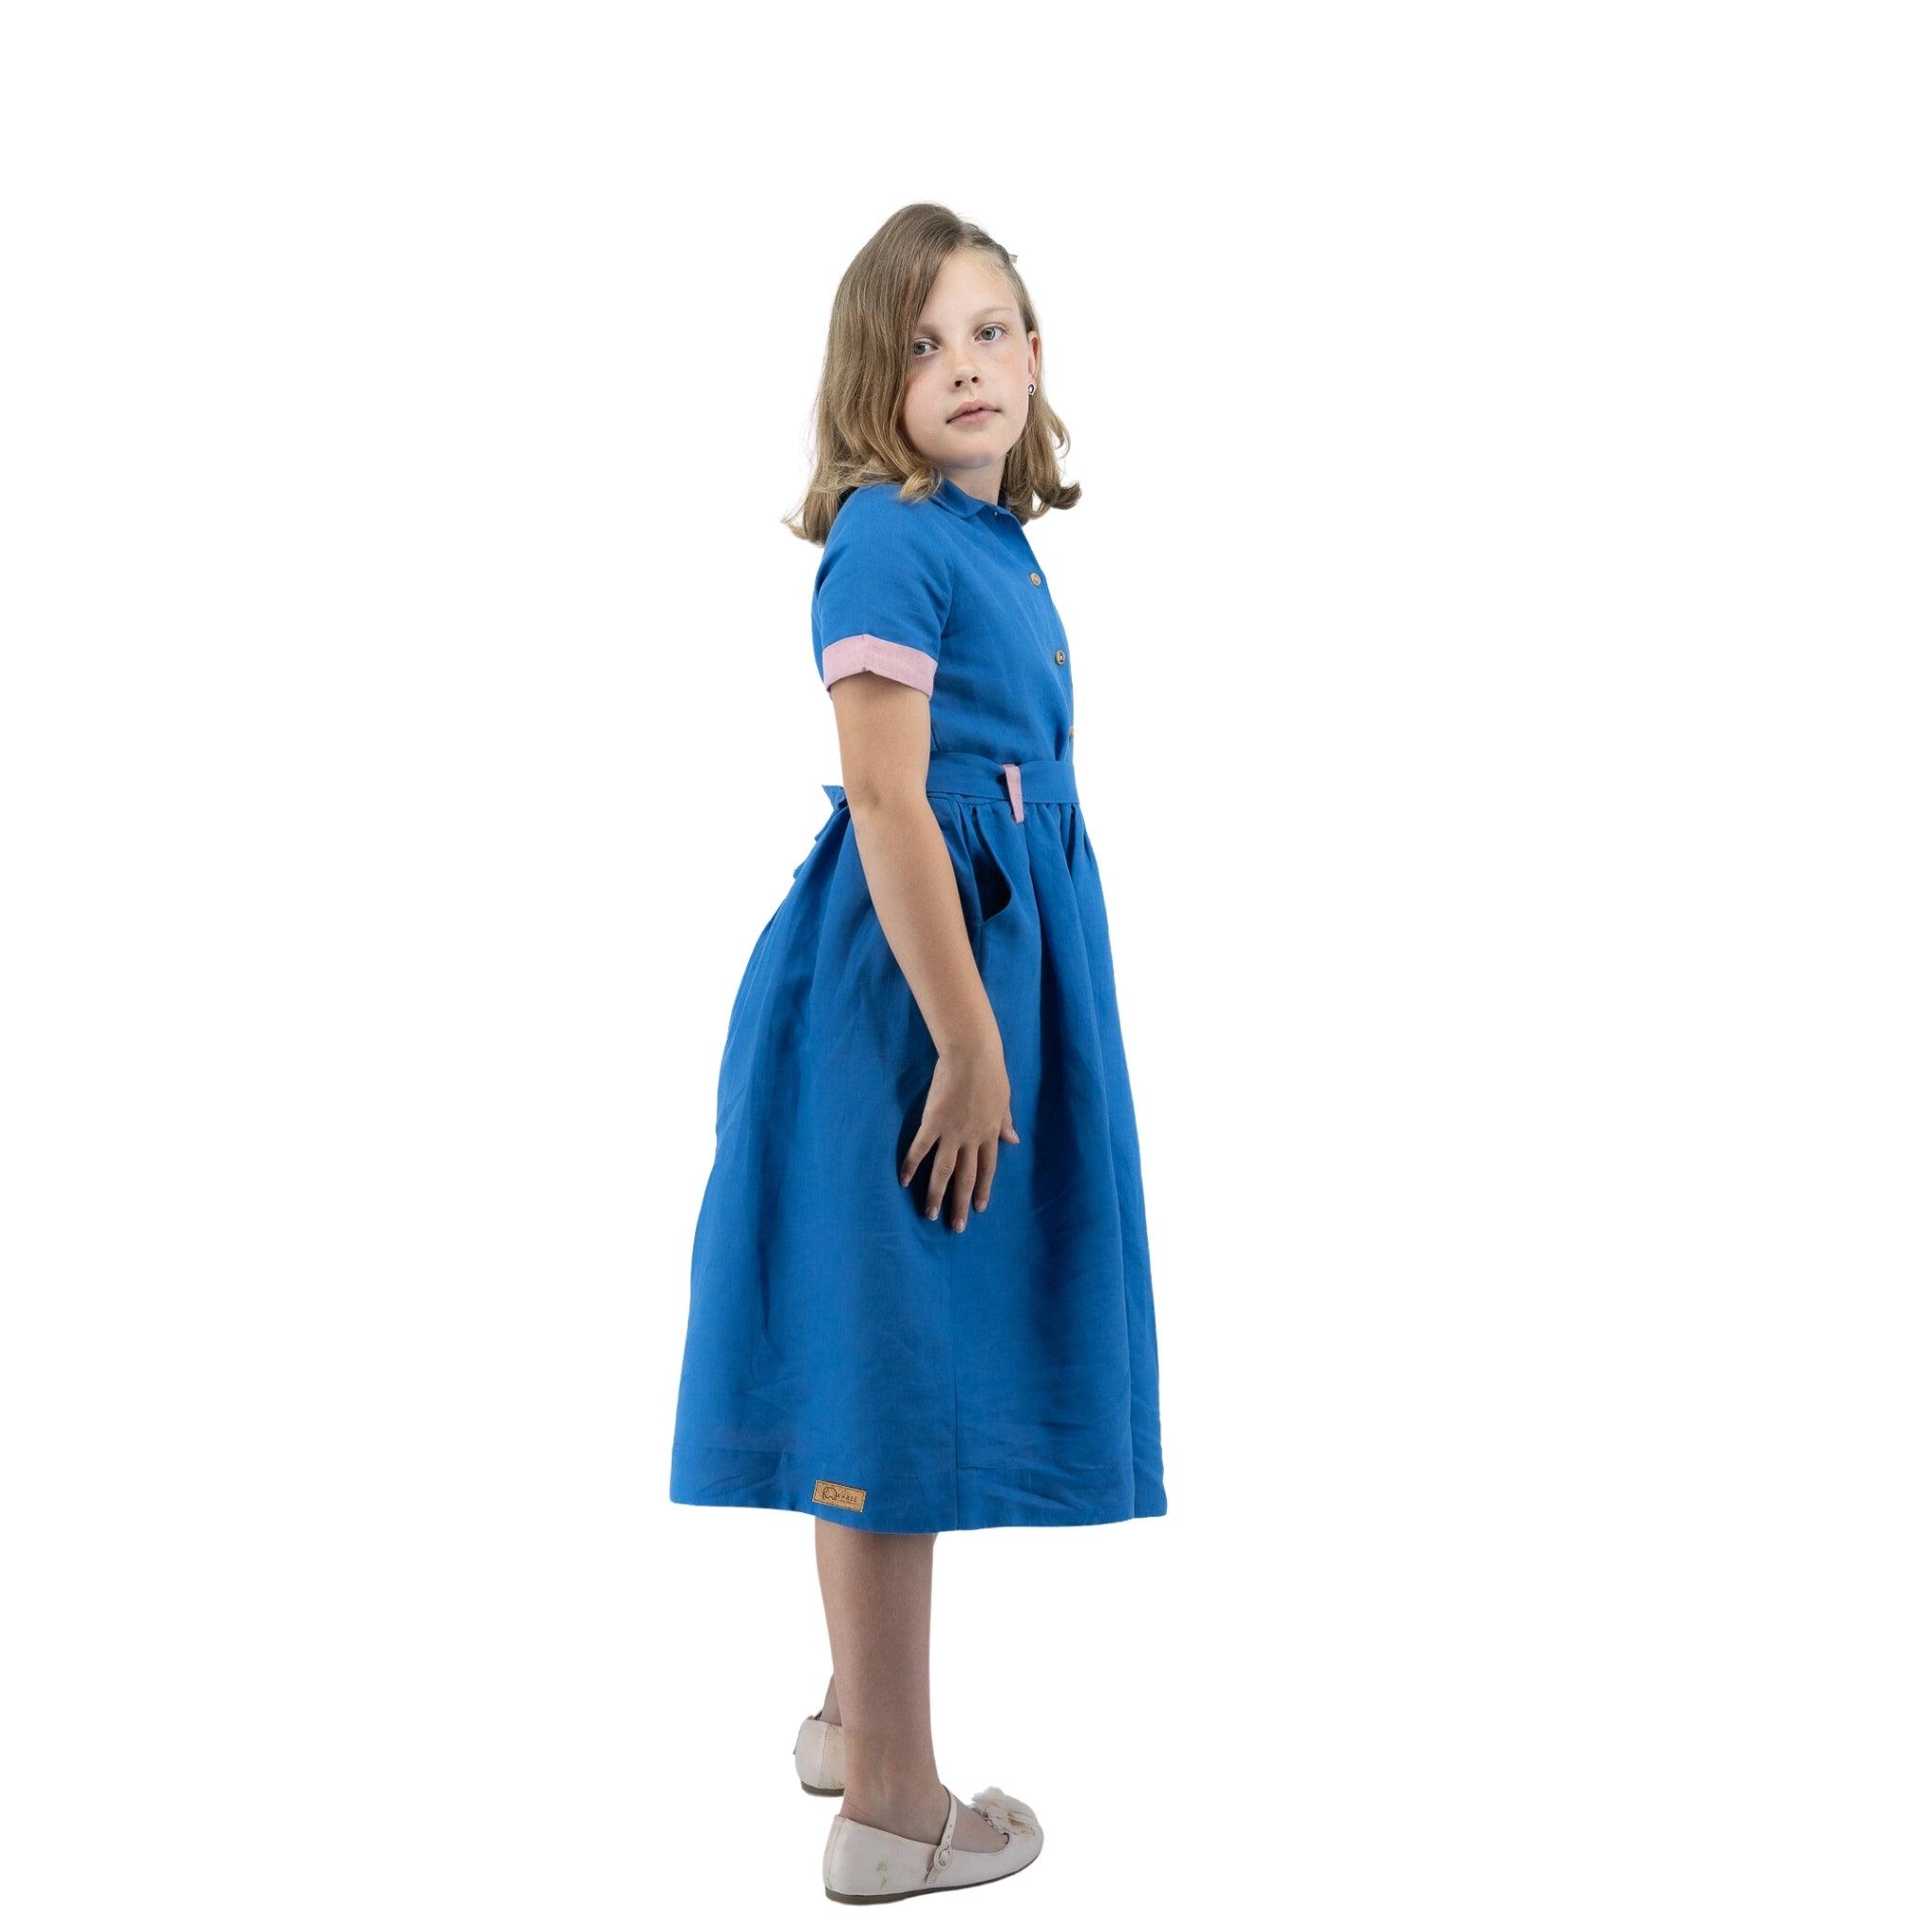 Young girl in a Karee Parisian Blue Linen Dress for Girls and white shoes standing sideways, looking over her shoulder with a neutral expression.